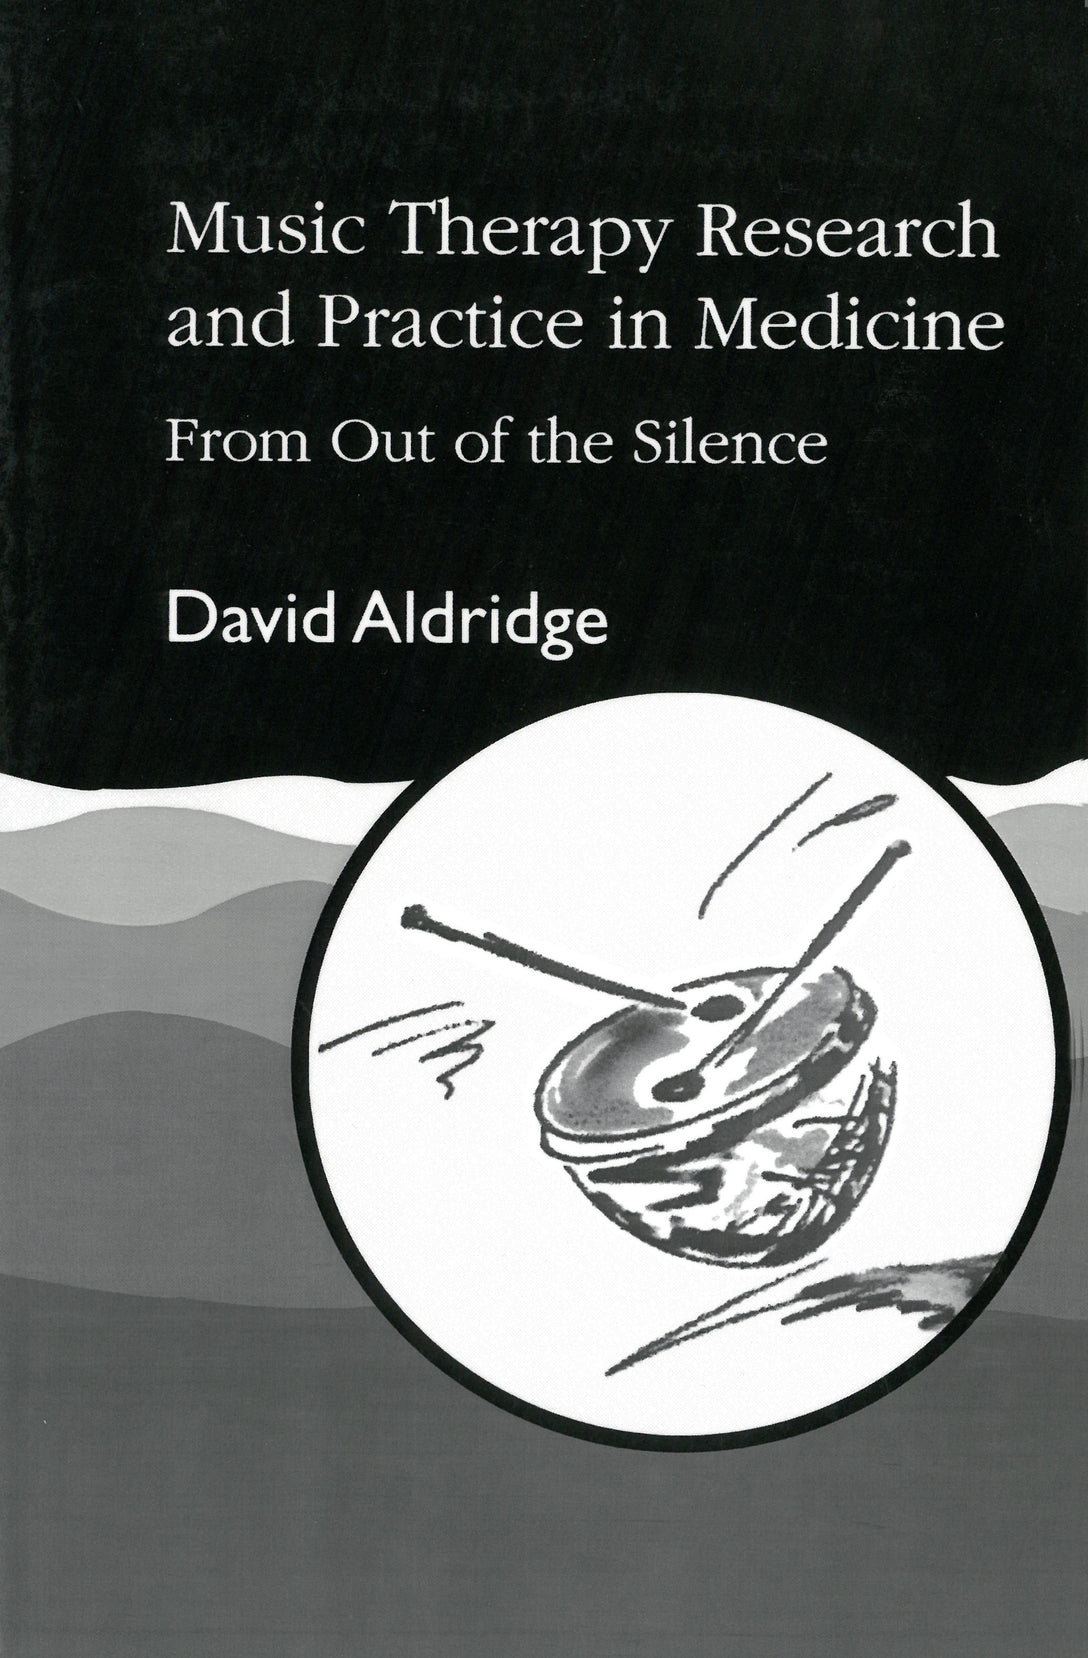 Music Therapy Research and Practice in Medicine by David Aldridge